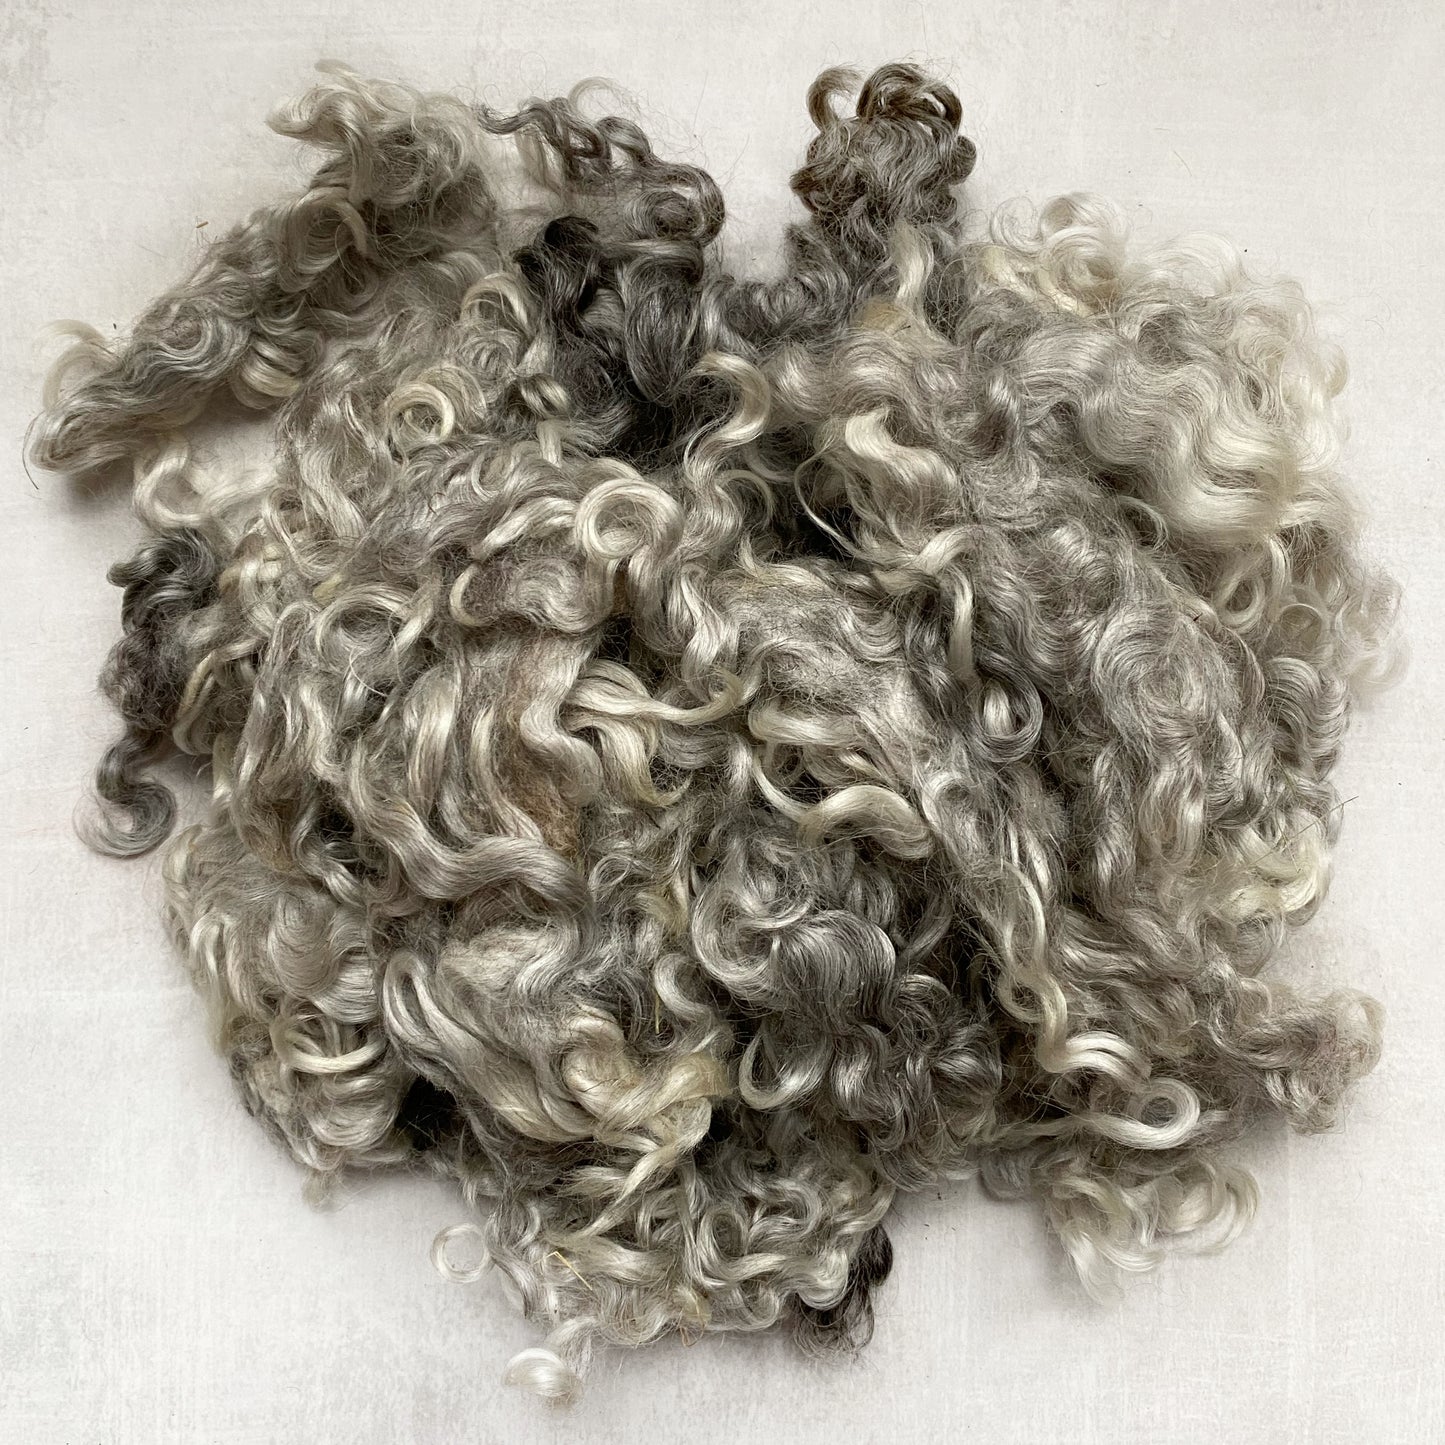 Washed Wool - Lincoln Lot F